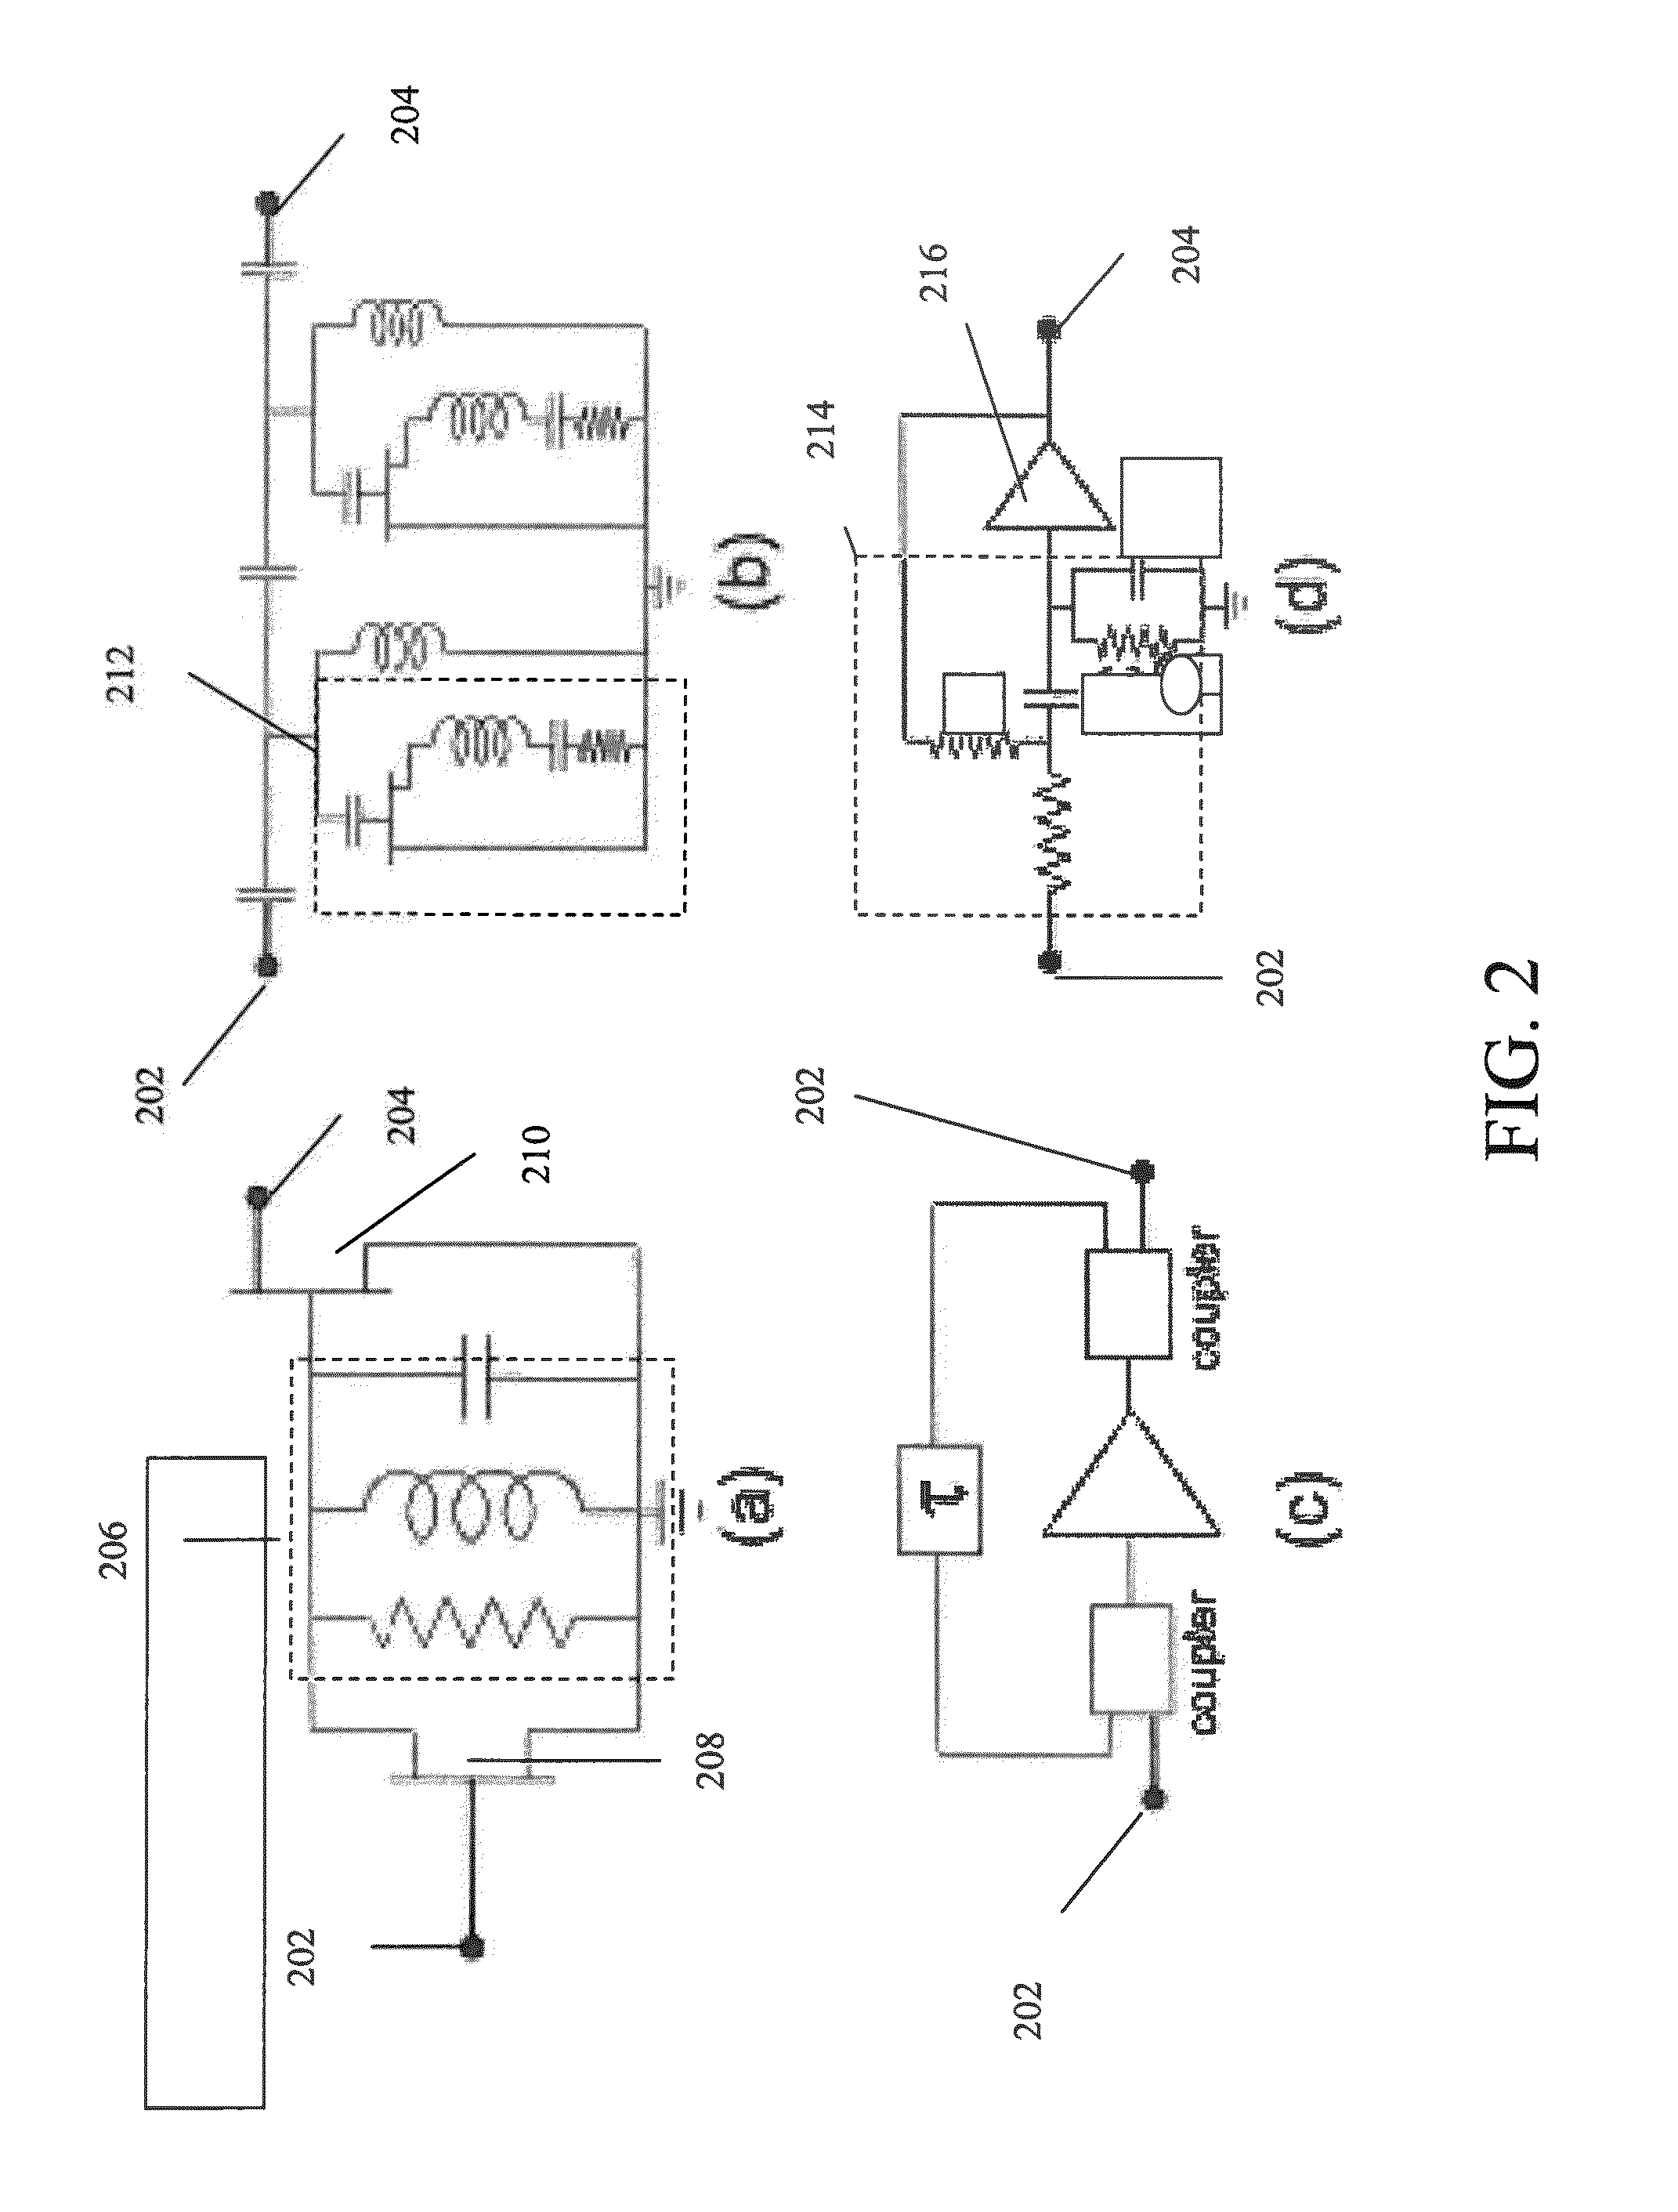 Multi-Function Receiver With Switched Channelizer Having High Dynamic Range Active Microwave Filters Using Carbon Nanotube Electronics